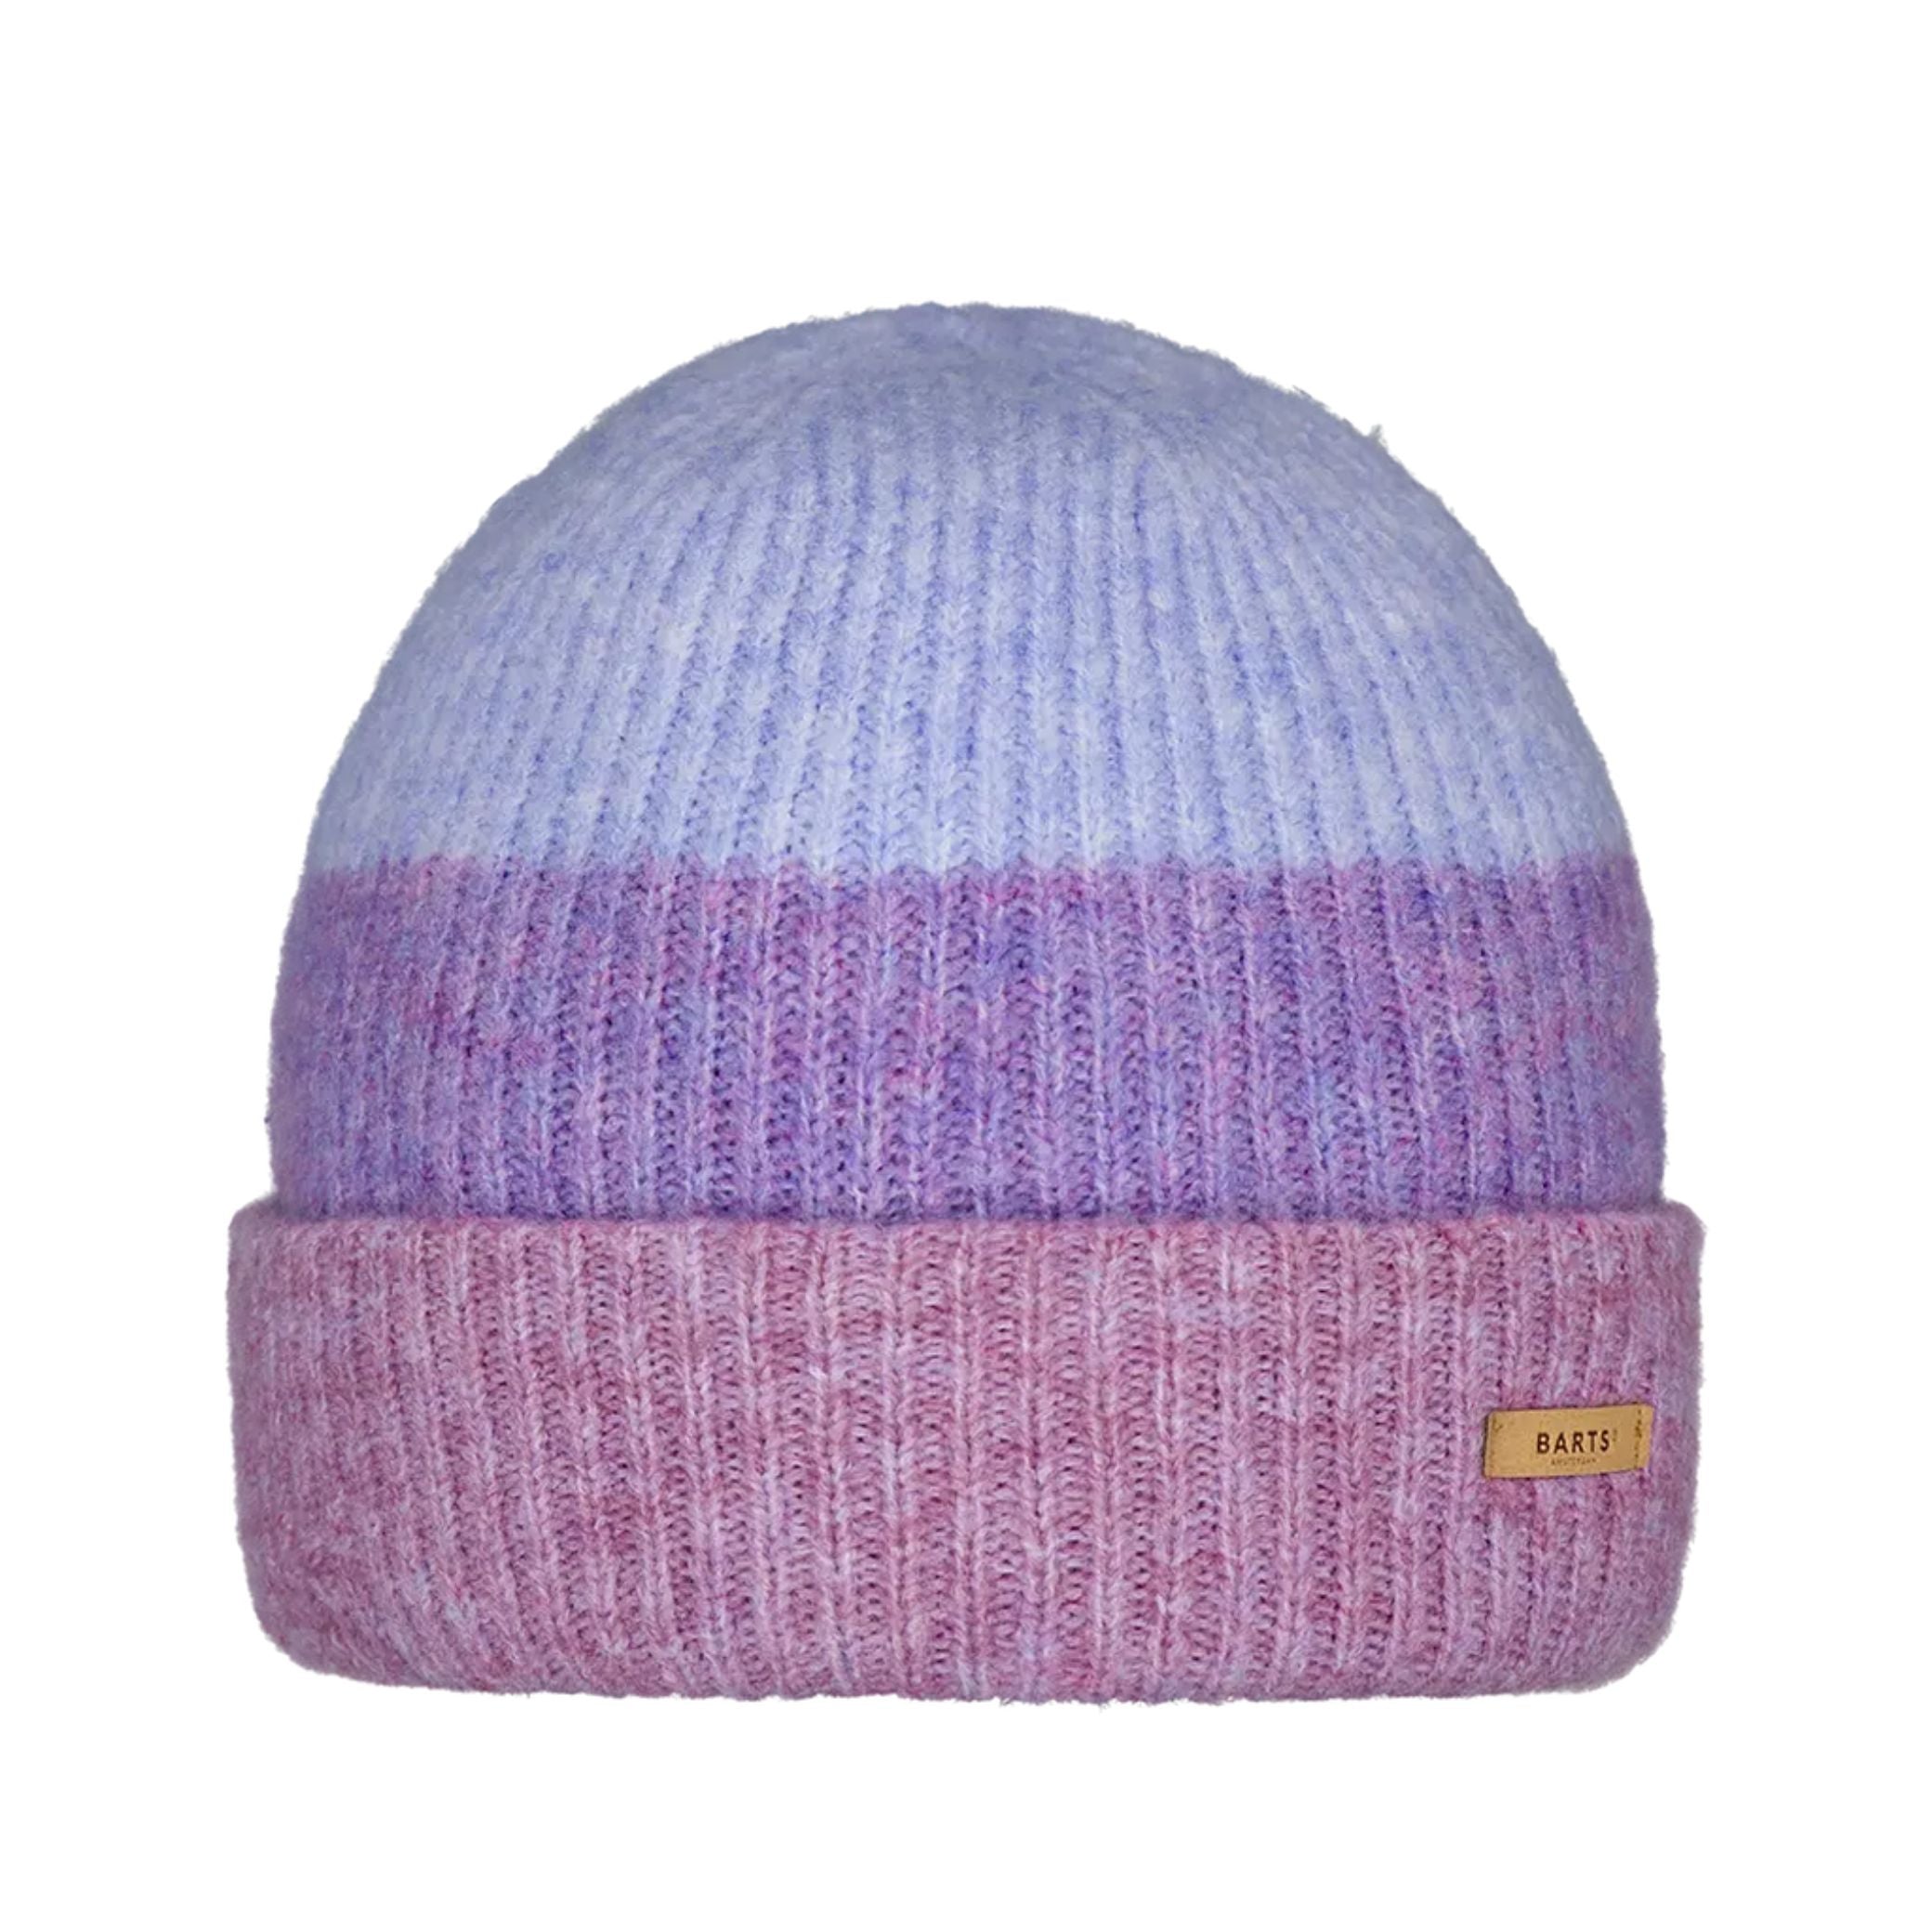 - | Outdoor Shop The Portwest Barts Suzam Beanie